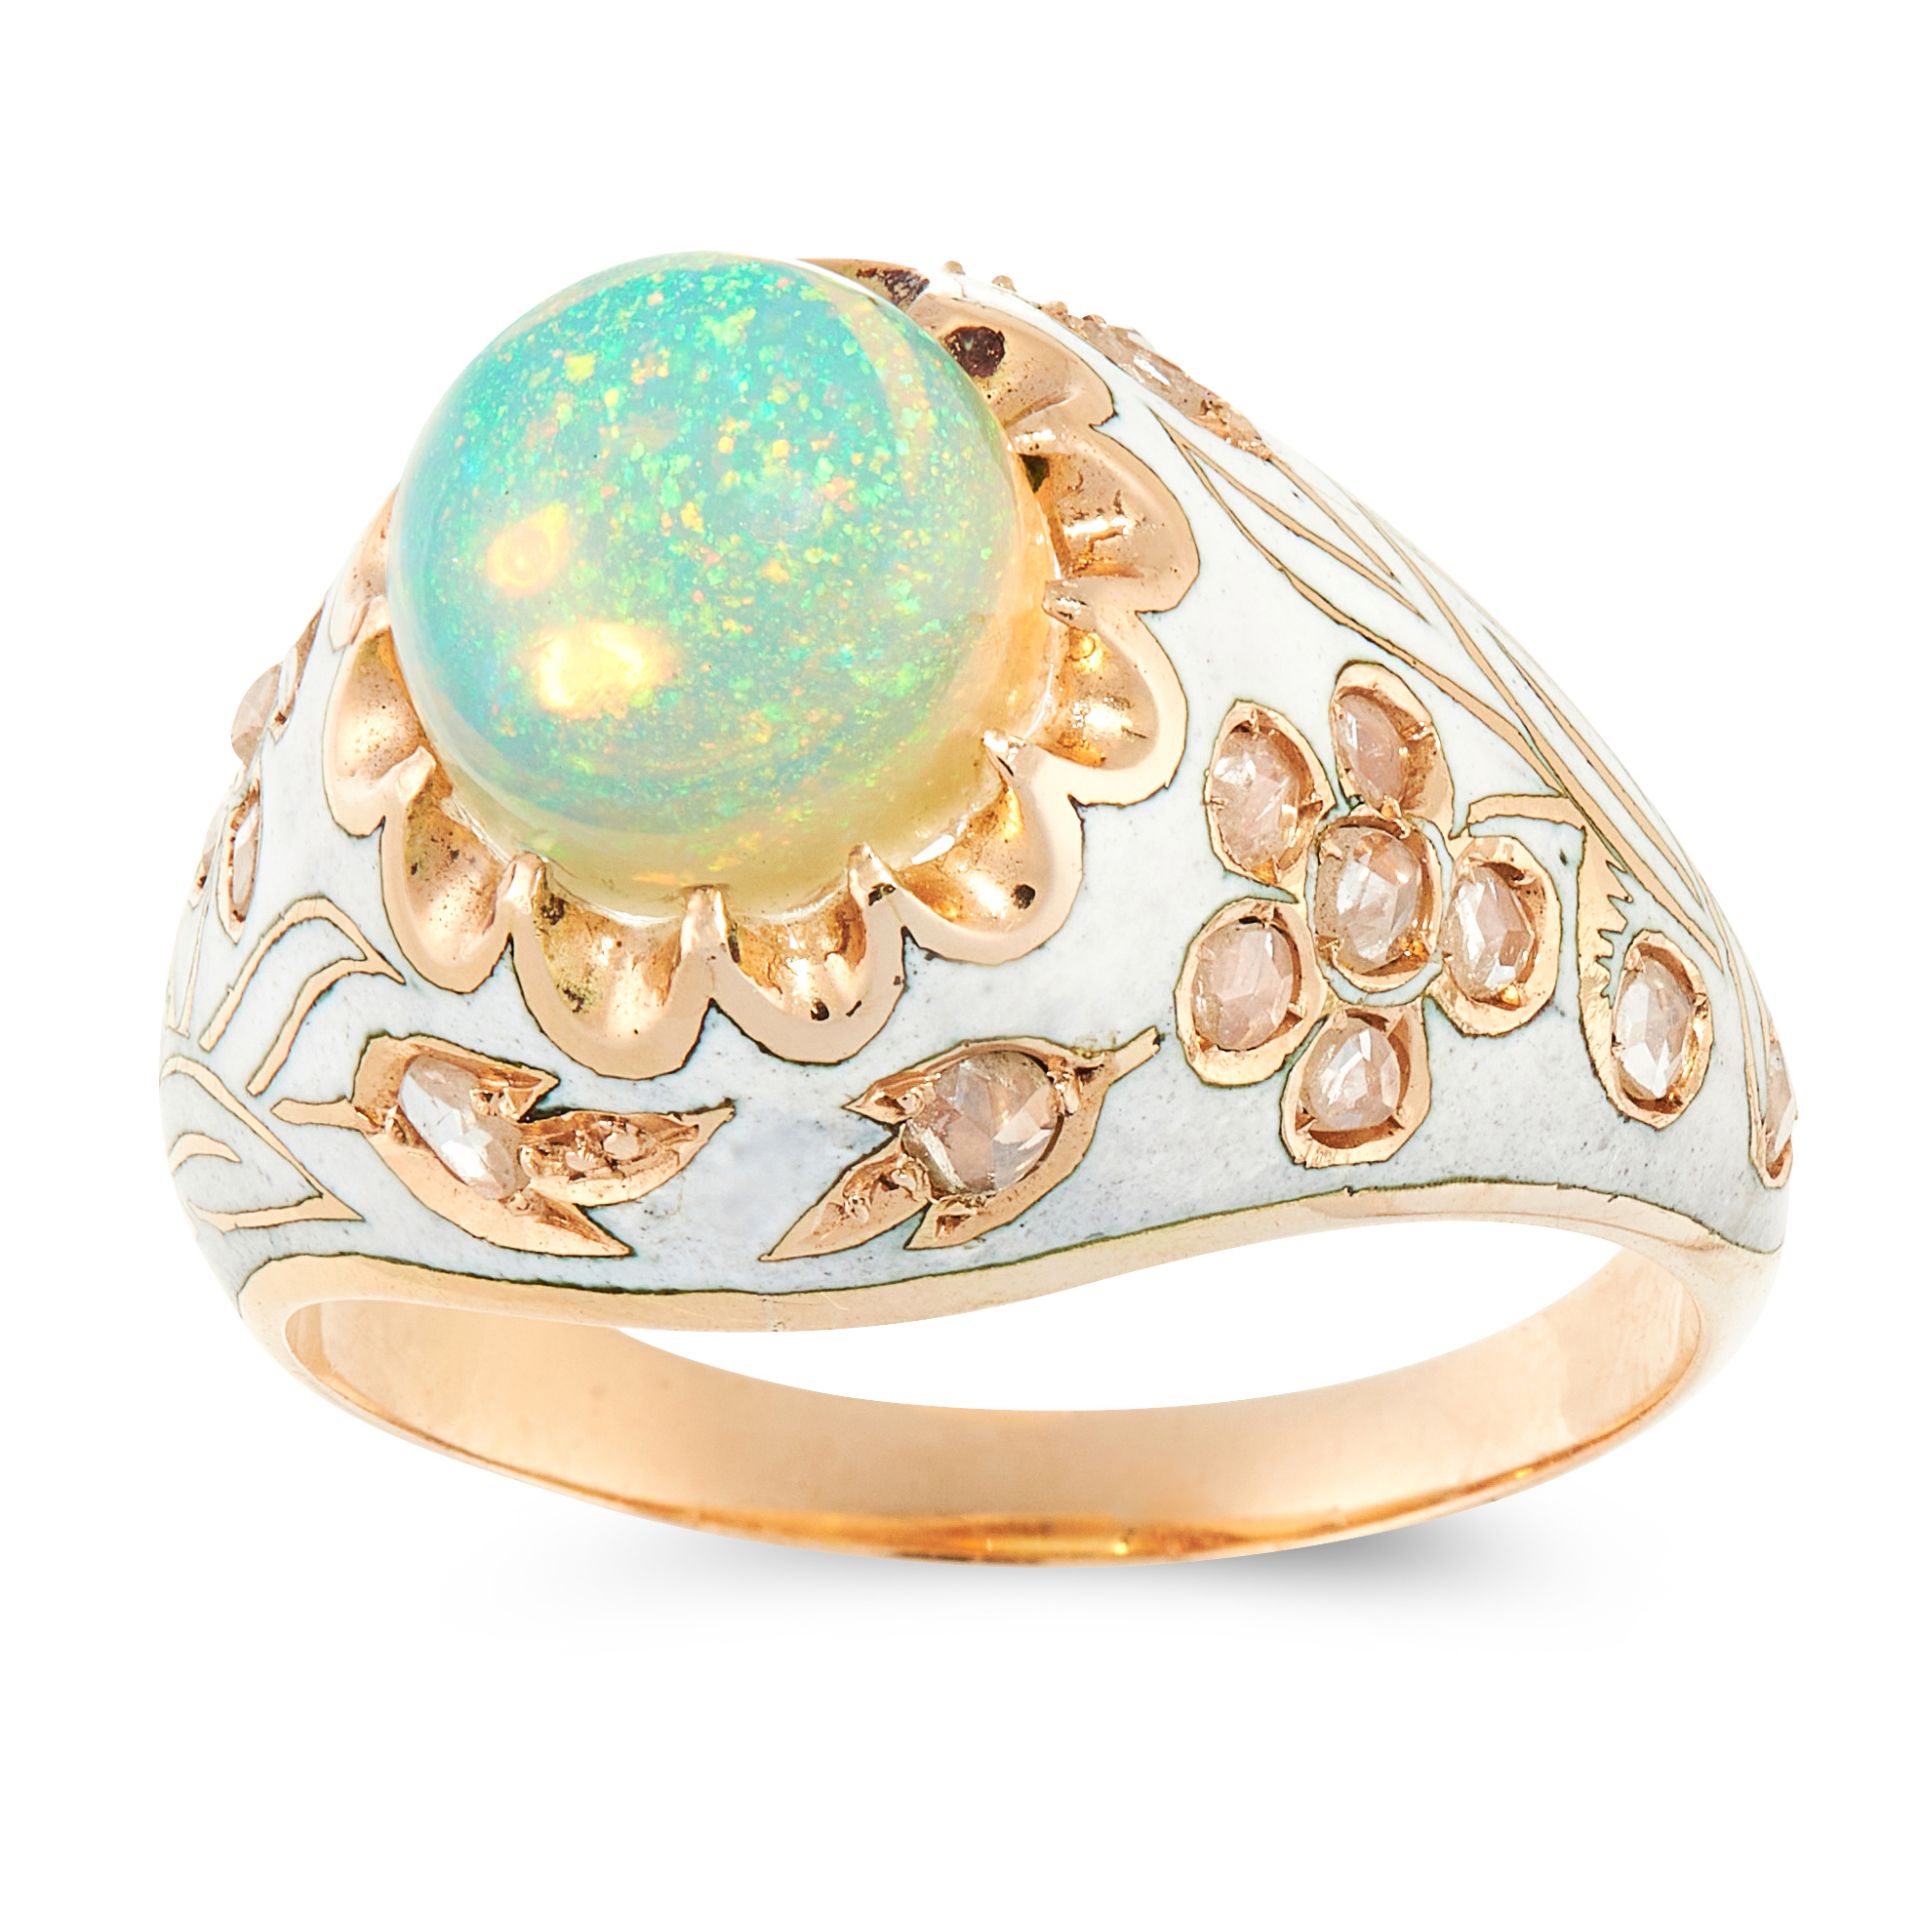 AN ANTIQUE OPAL, DIAMOND AND ENAMEL DRESS RING in high carat yellow gold, set with a round